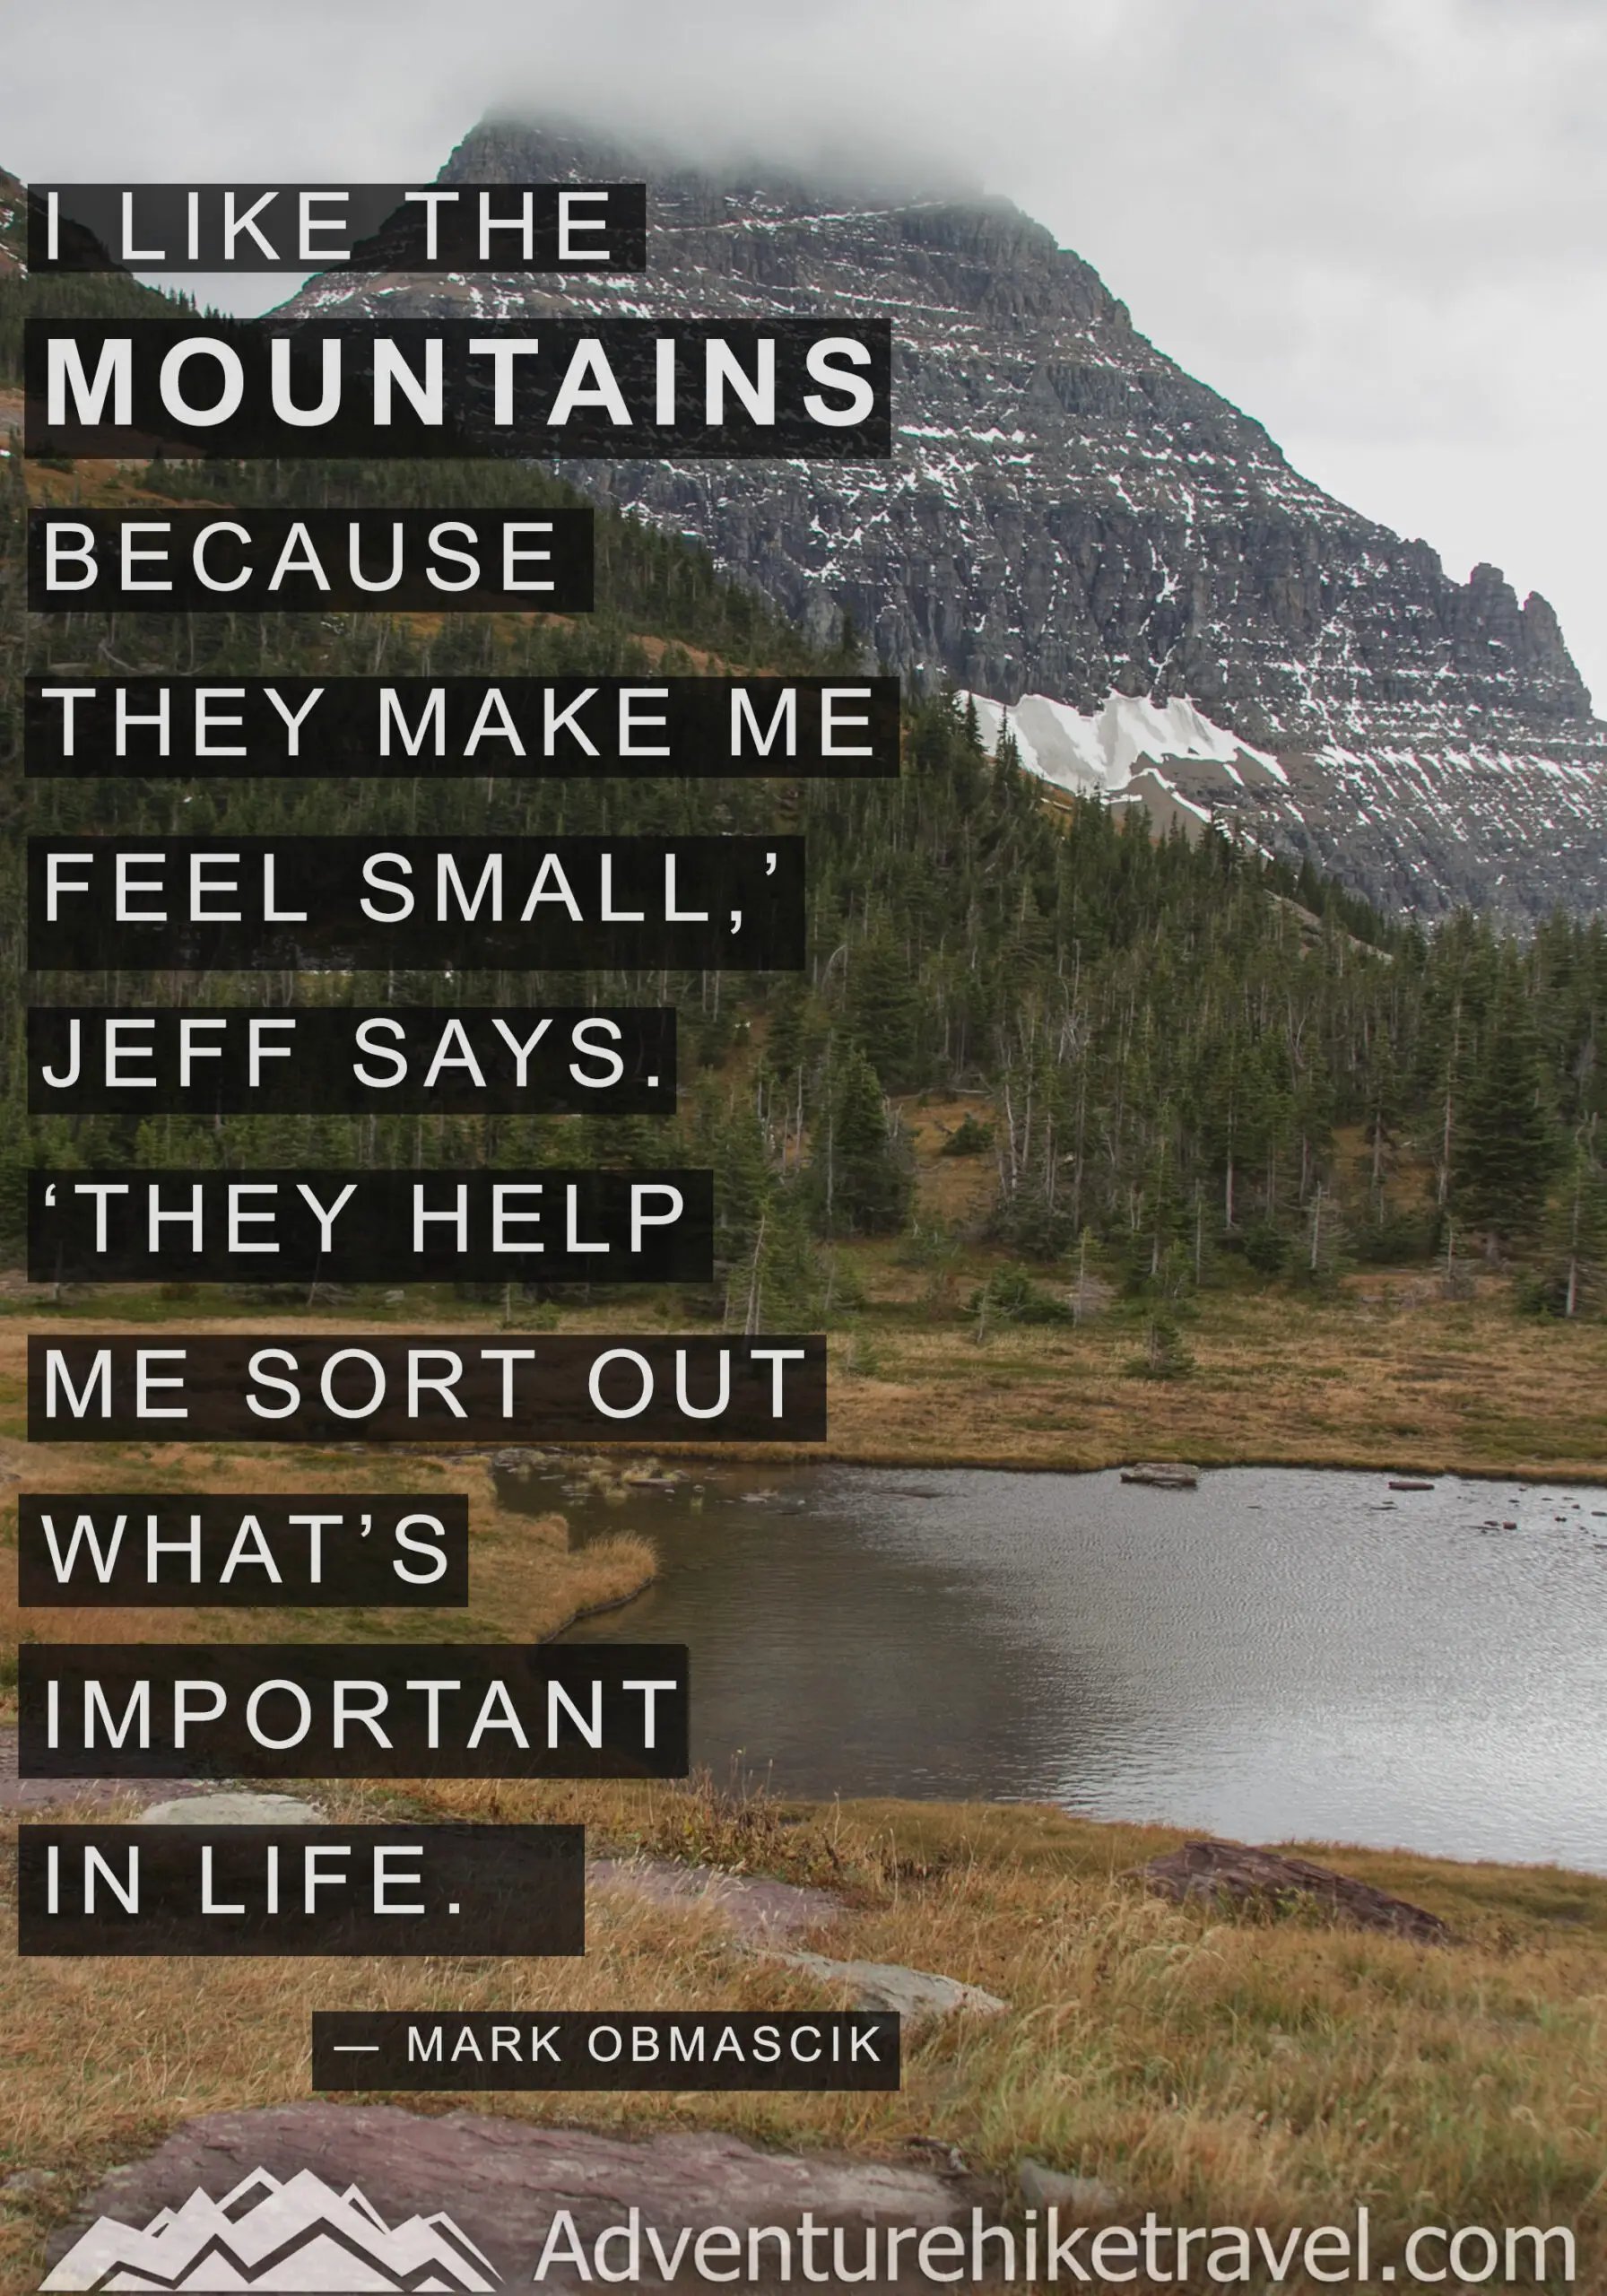 "I like the mountains because they make me feel small,' Jeff says. 'They help me sort out what's important in life." -Mark Obmascik #hiking #quotes #inspirationalquotes #hikingquotes #adventurequotes #outdoors #trekking